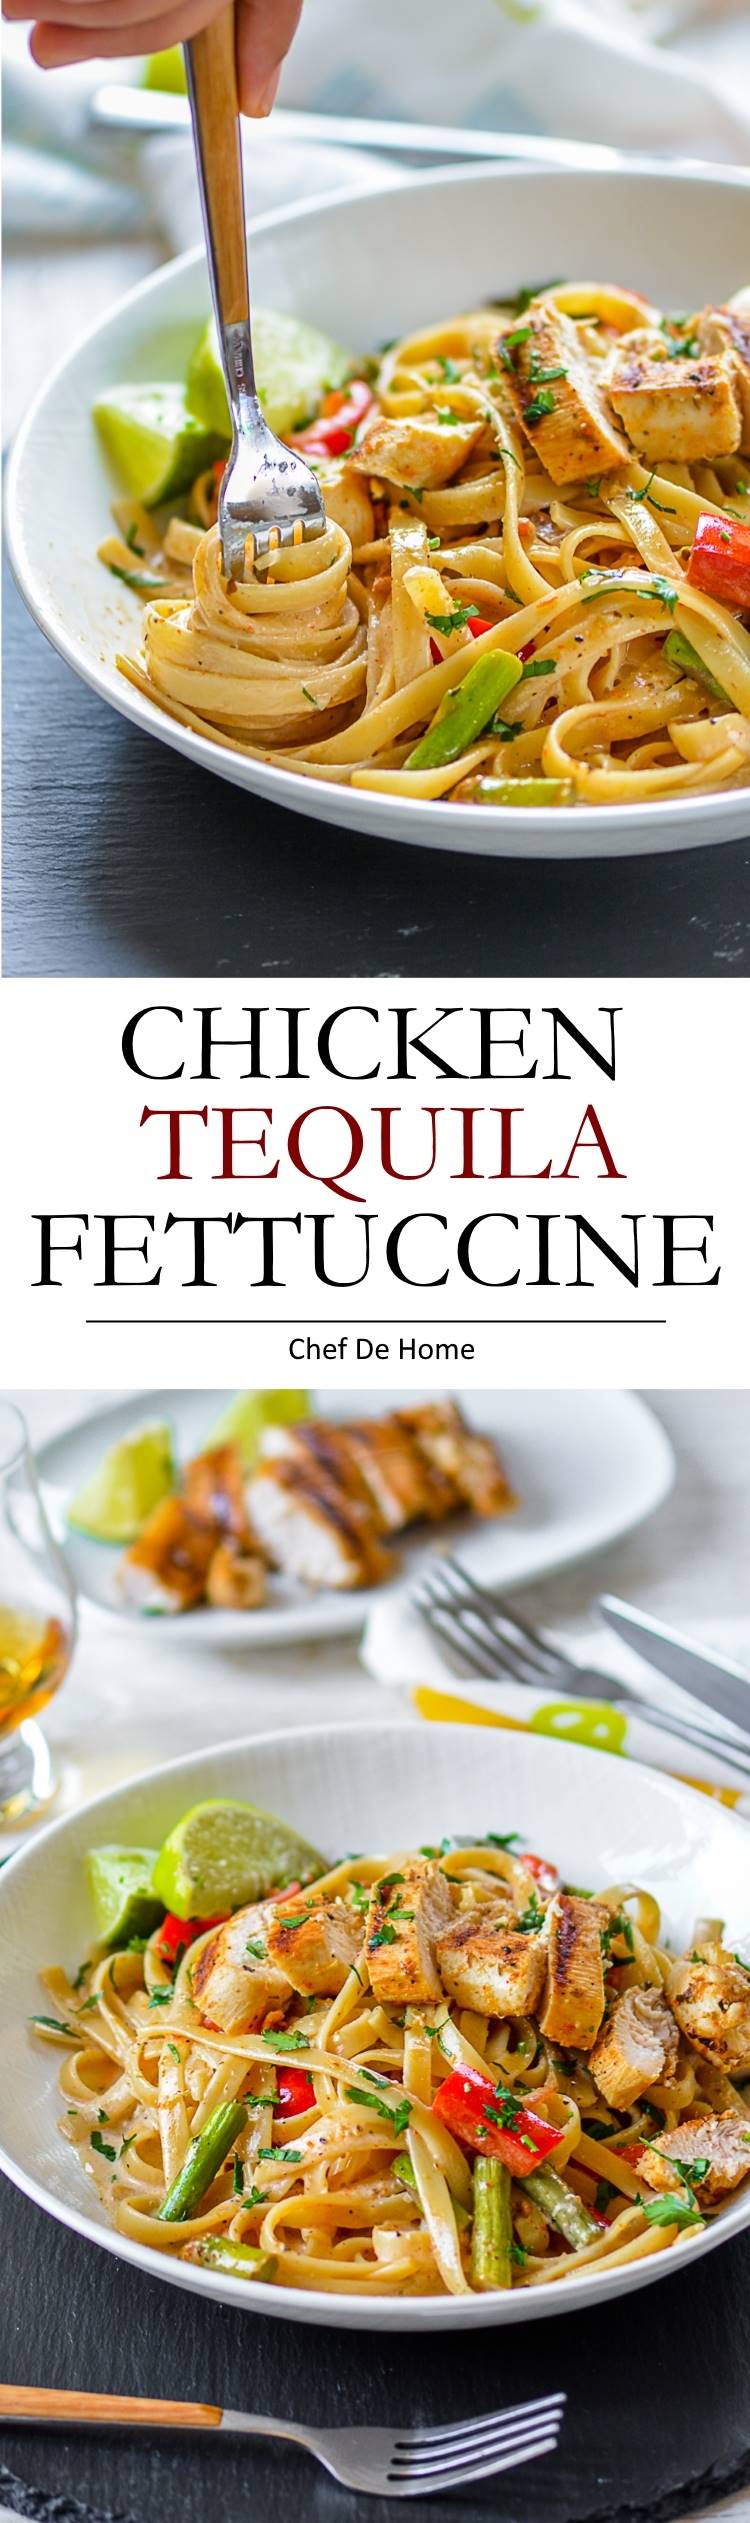 Italian Pasta dinner at home with restaurant style Chicken Tequila Fettuccine for dinner | chefdehome.com